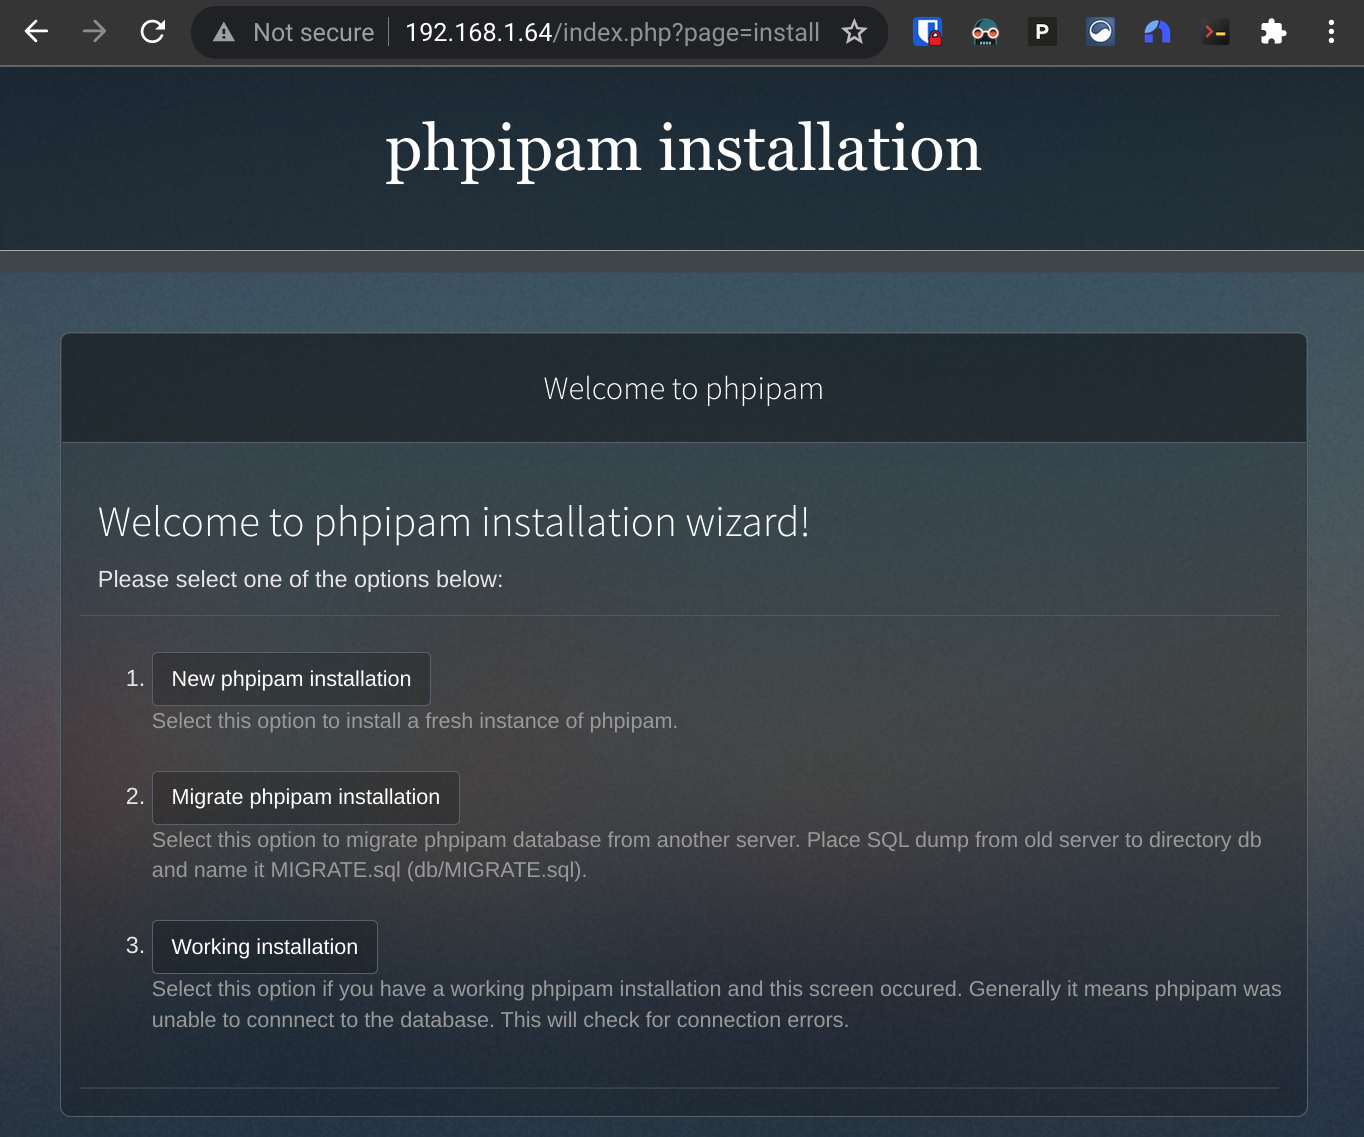 phpIPAM installation page